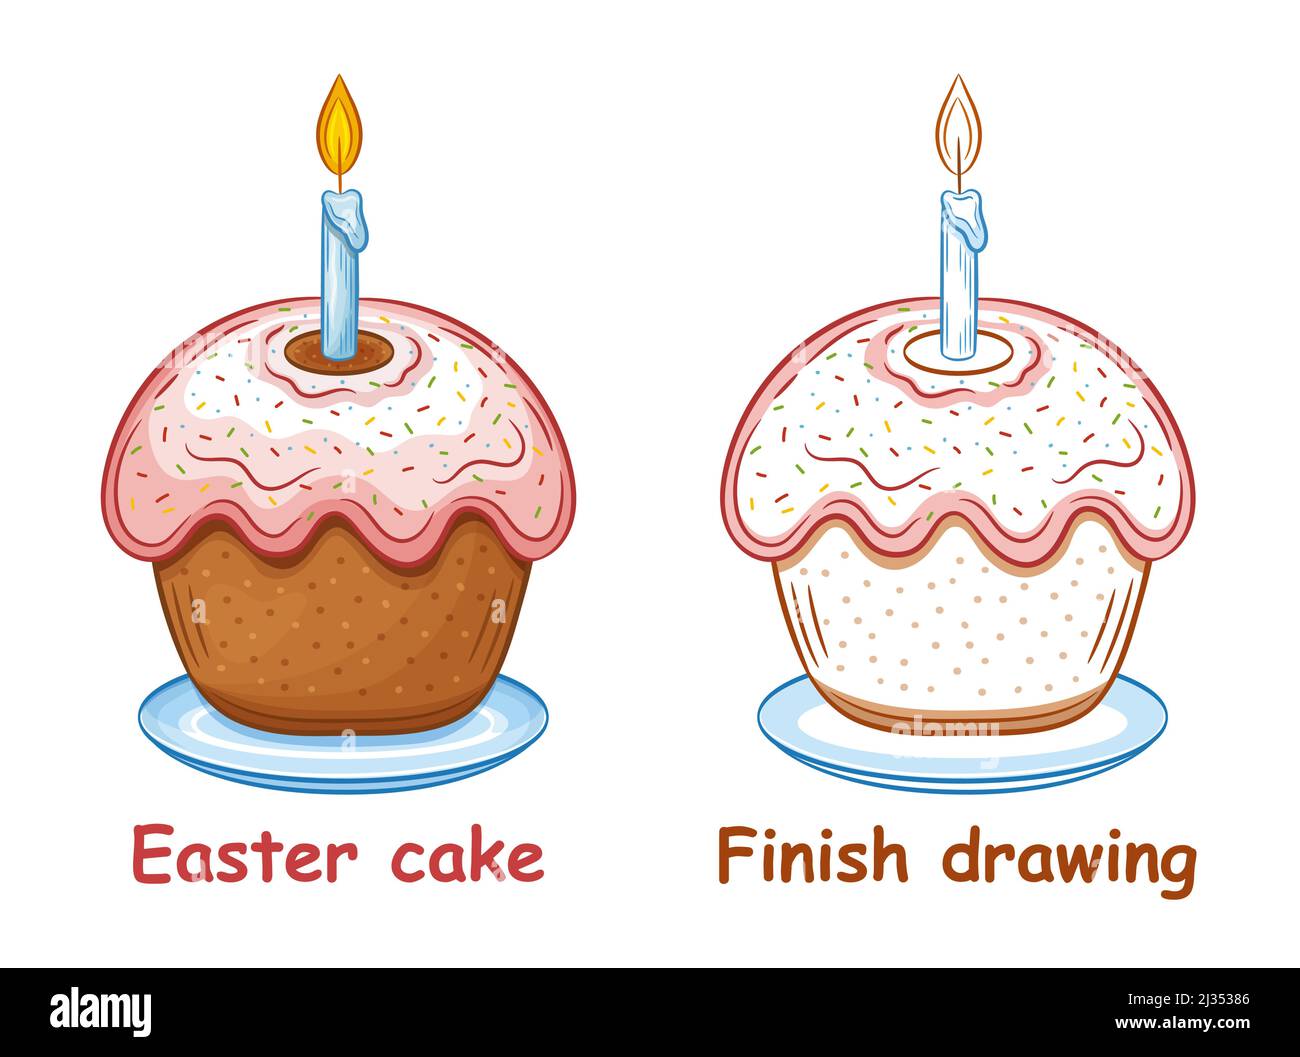 How to draw a Cake Step by Step – For Kids & Beginners-saigonsouth.com.vn